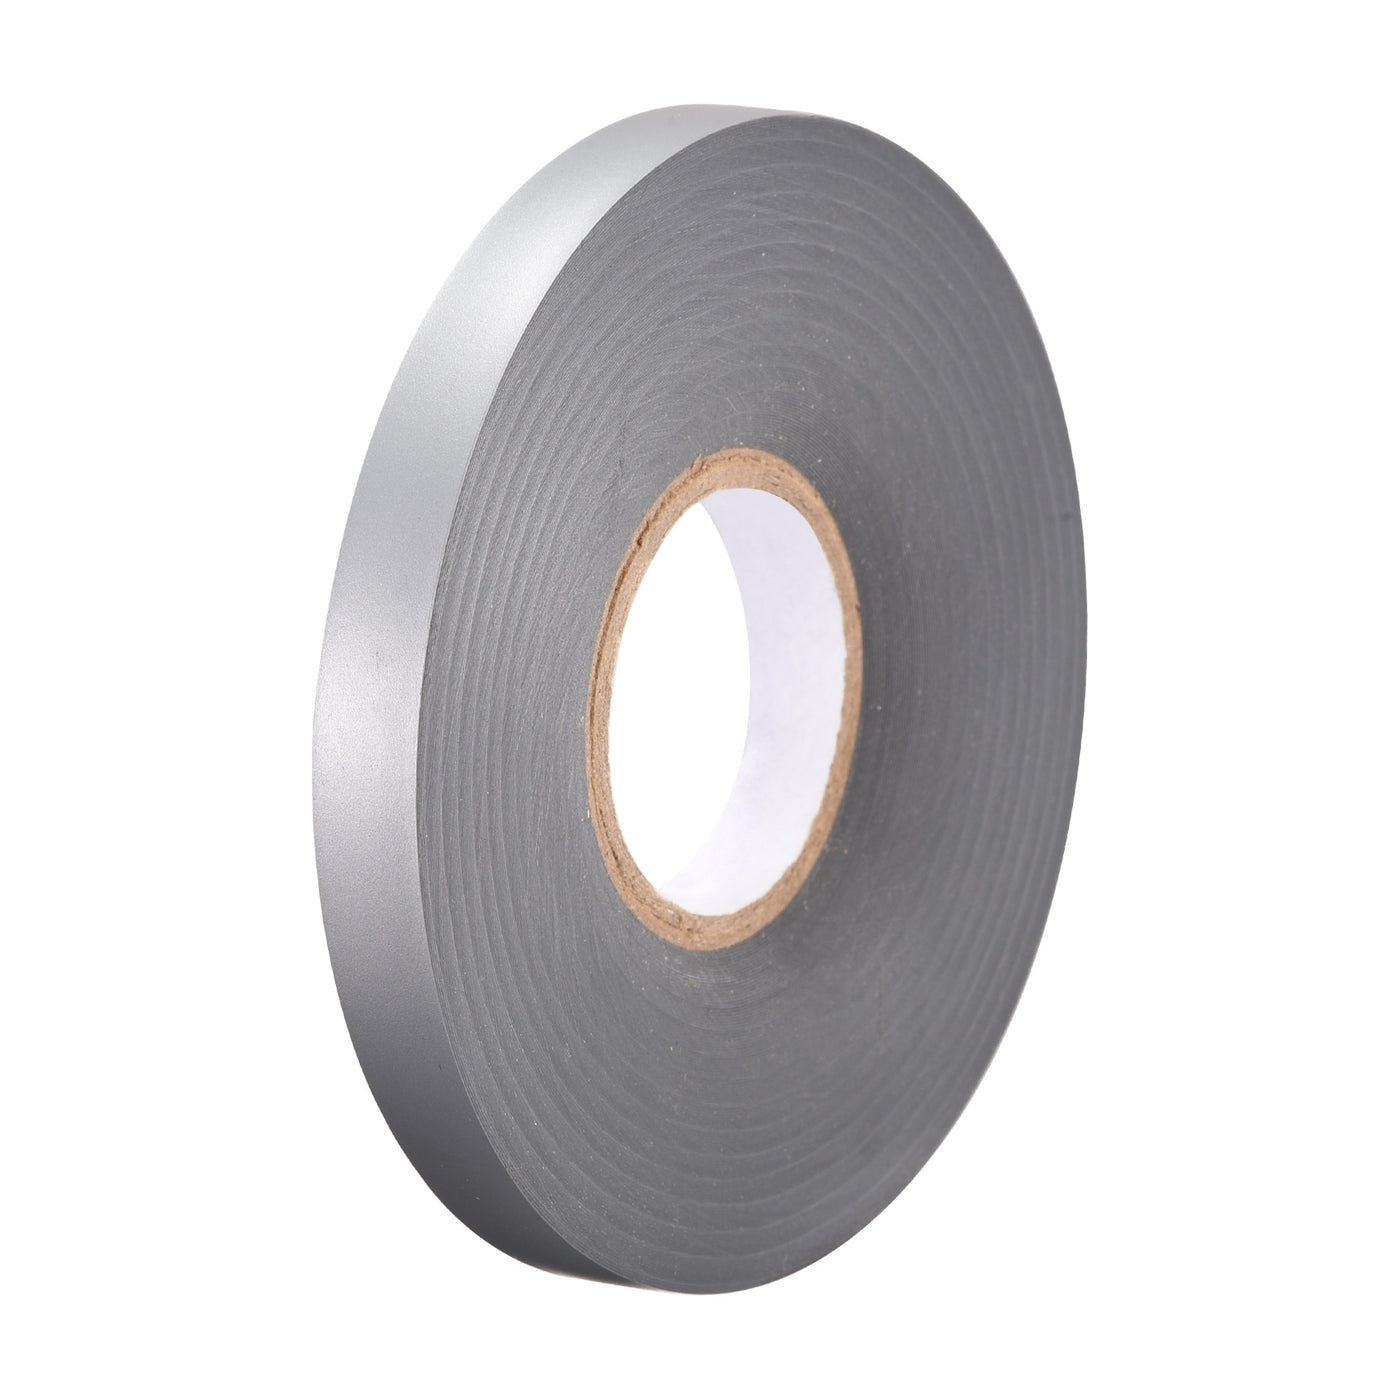 uxcell Uxcell Insulating Tape 10mm Width 26M Long 0.26mm Thick PVC Electrical Tape Grey